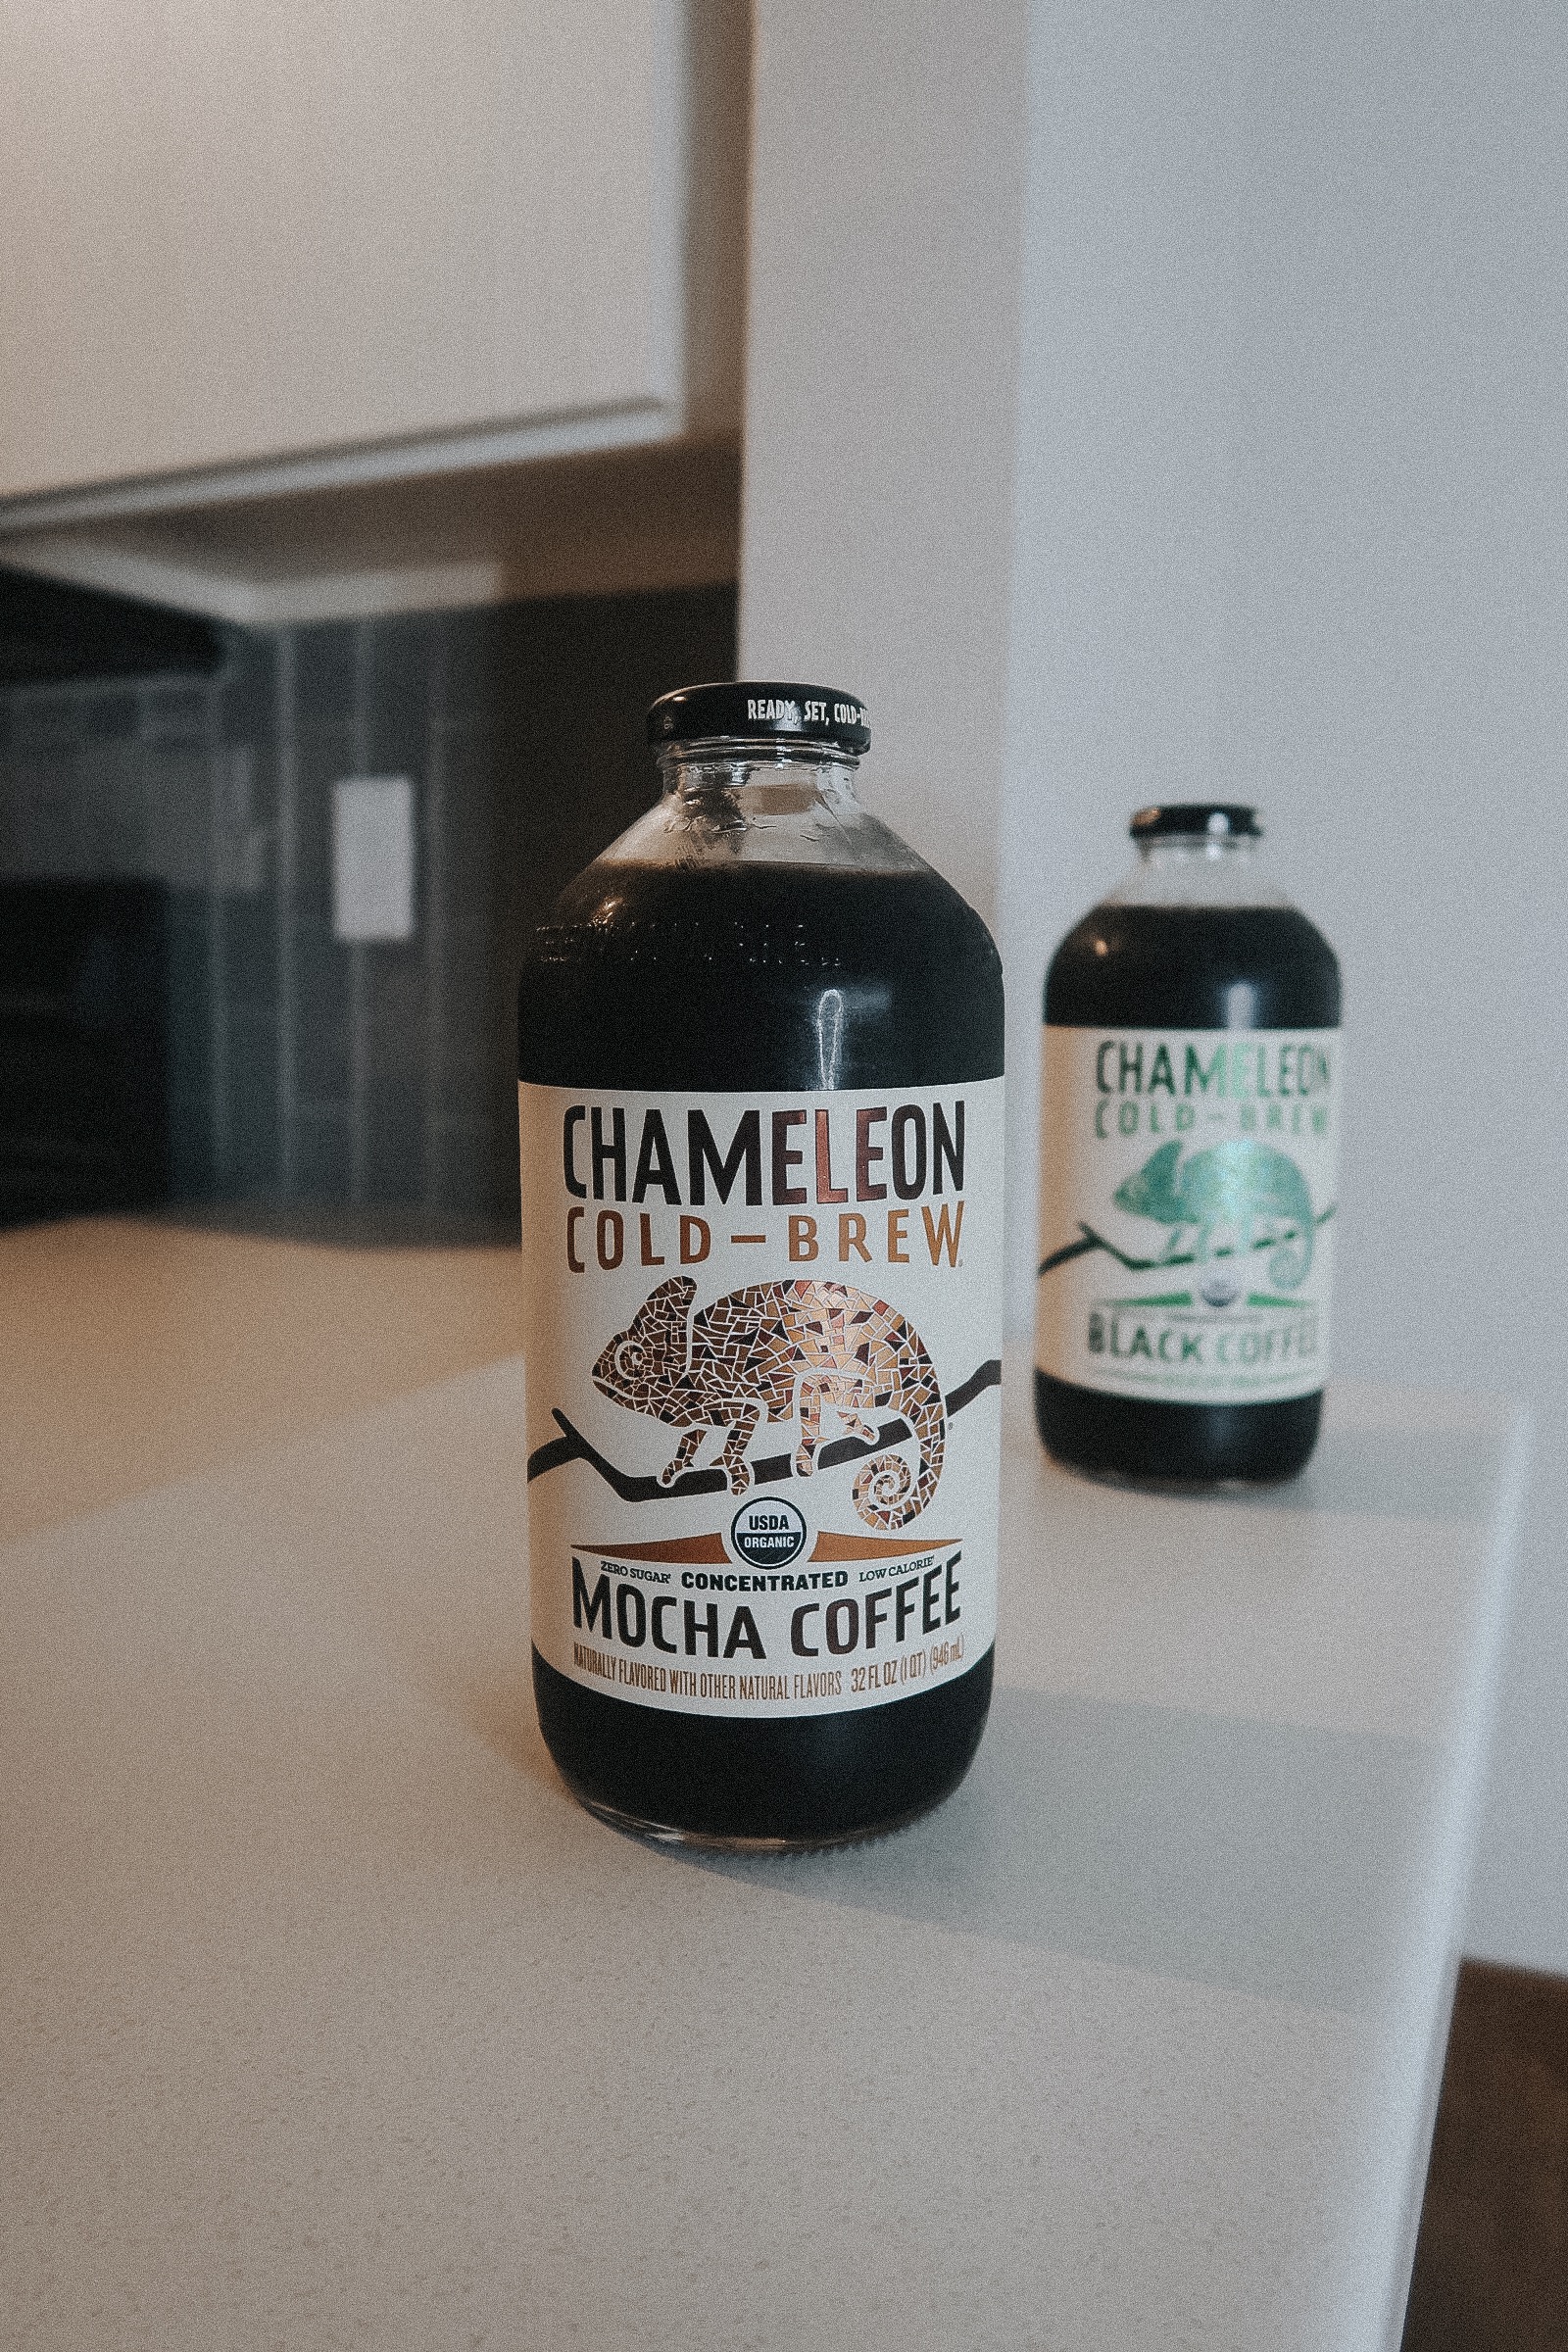 Demi Bang talks about Chameleon Cold-Brew in Mocha Coffee.